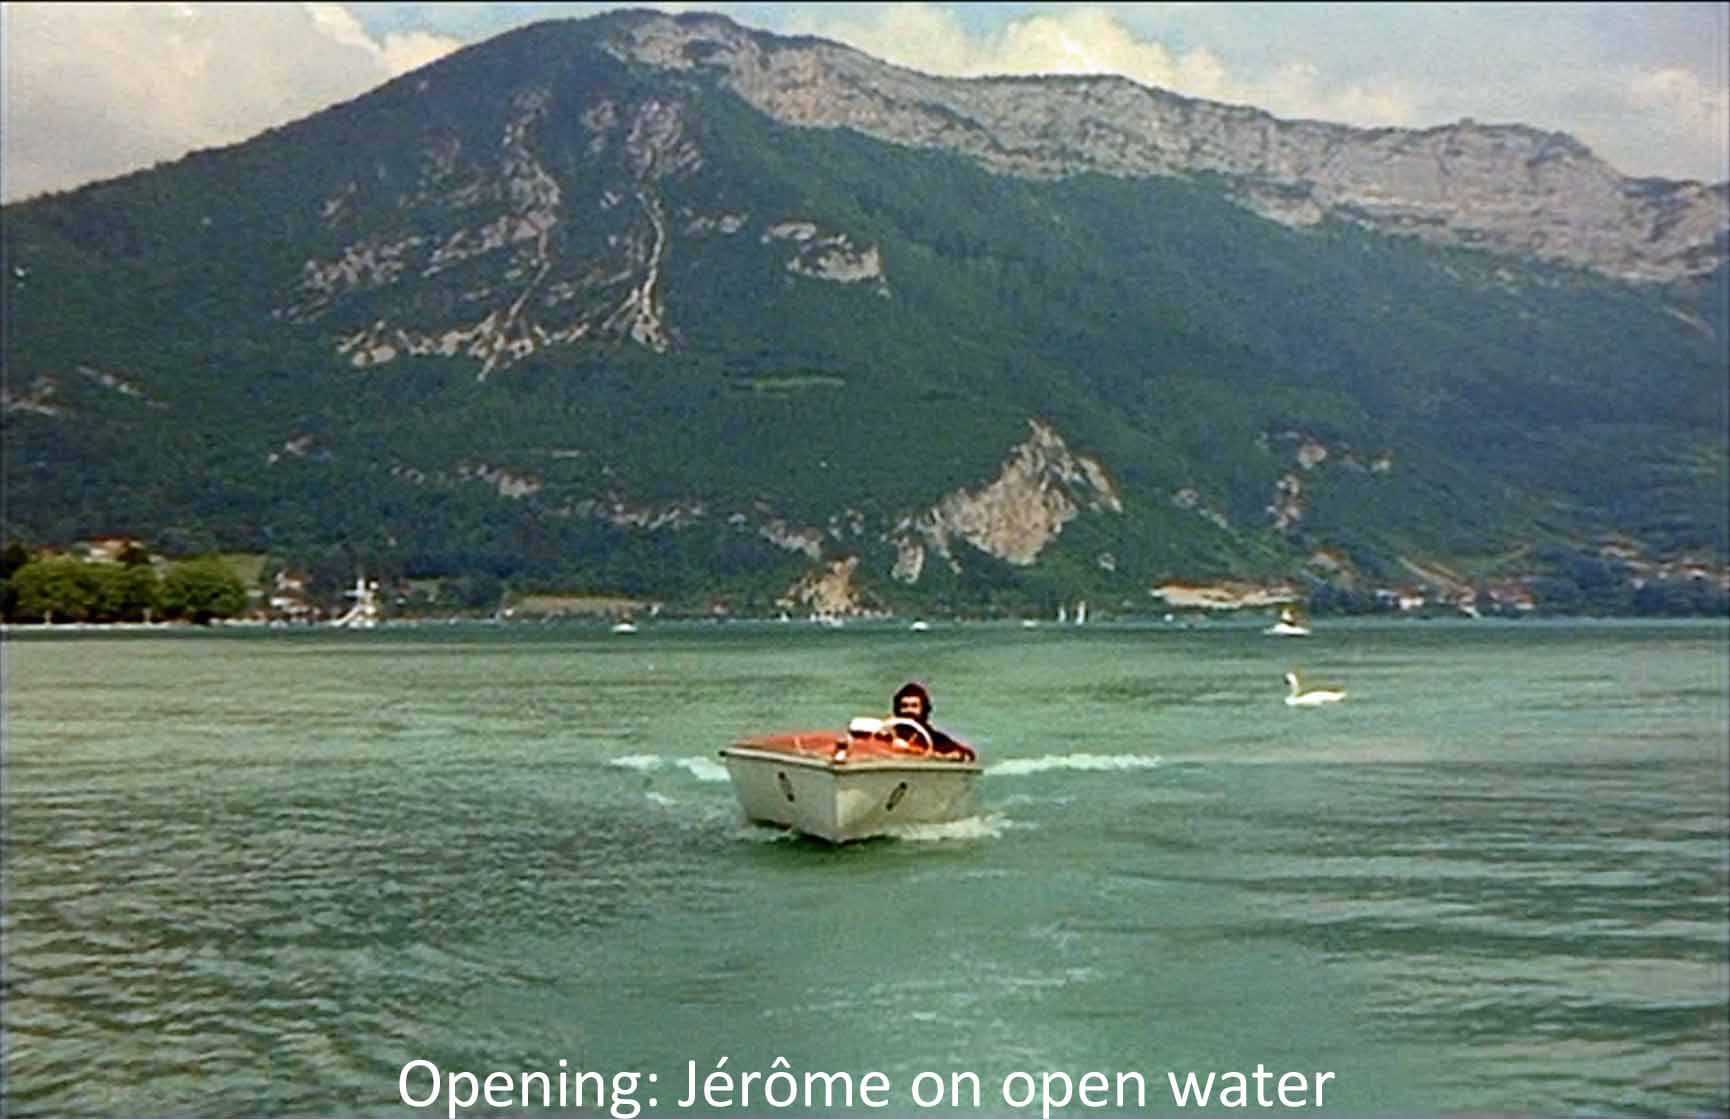 Opening: Jerome on open water